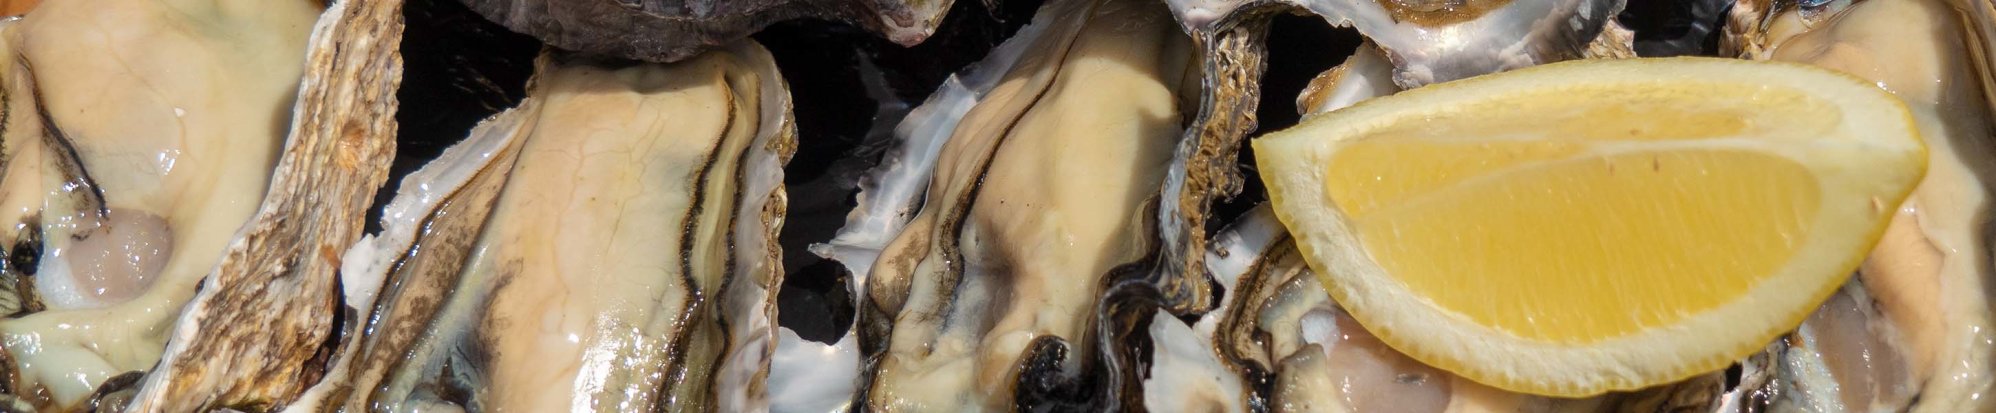  Bluff Oysters 